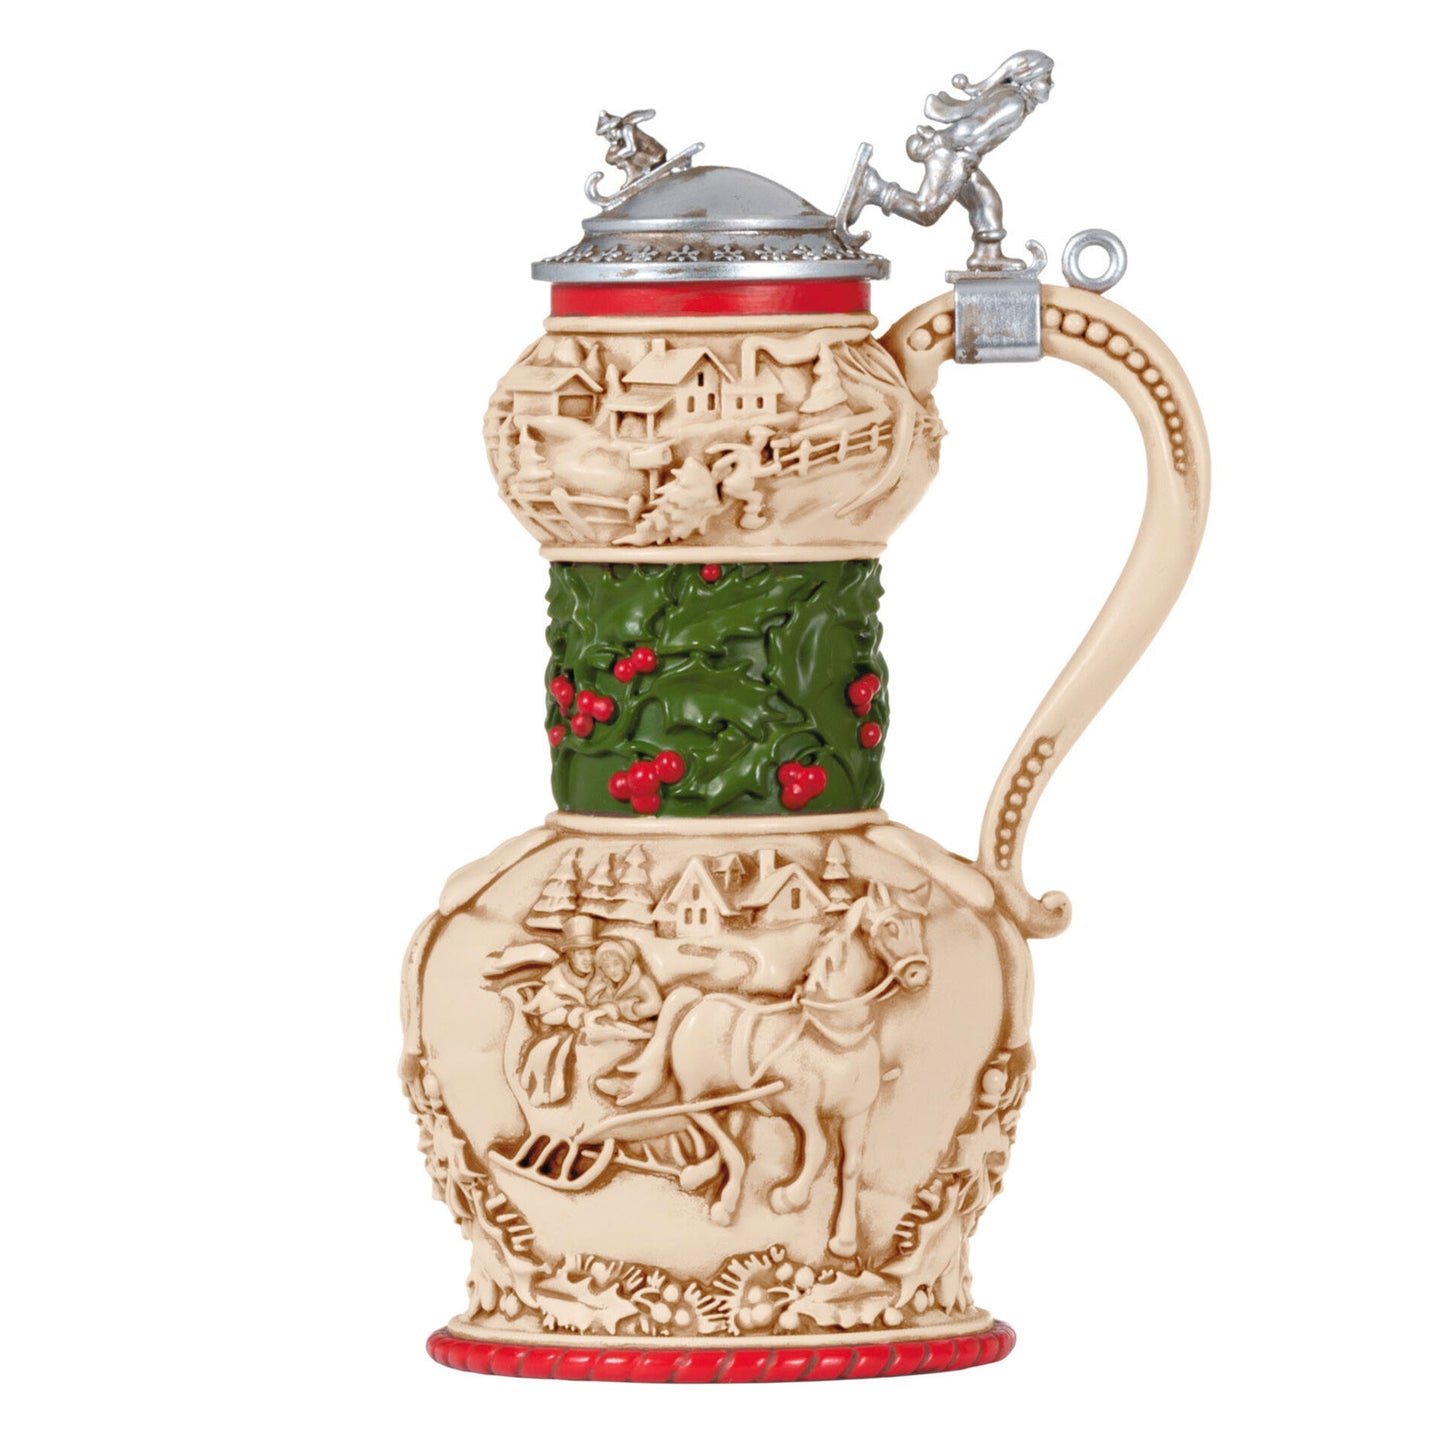 Christmas ornament depicting an ivory colored beer stein with holiday carvings, red trim, holly embellishment wrapped around the center, and an ornamental silver flip top. 